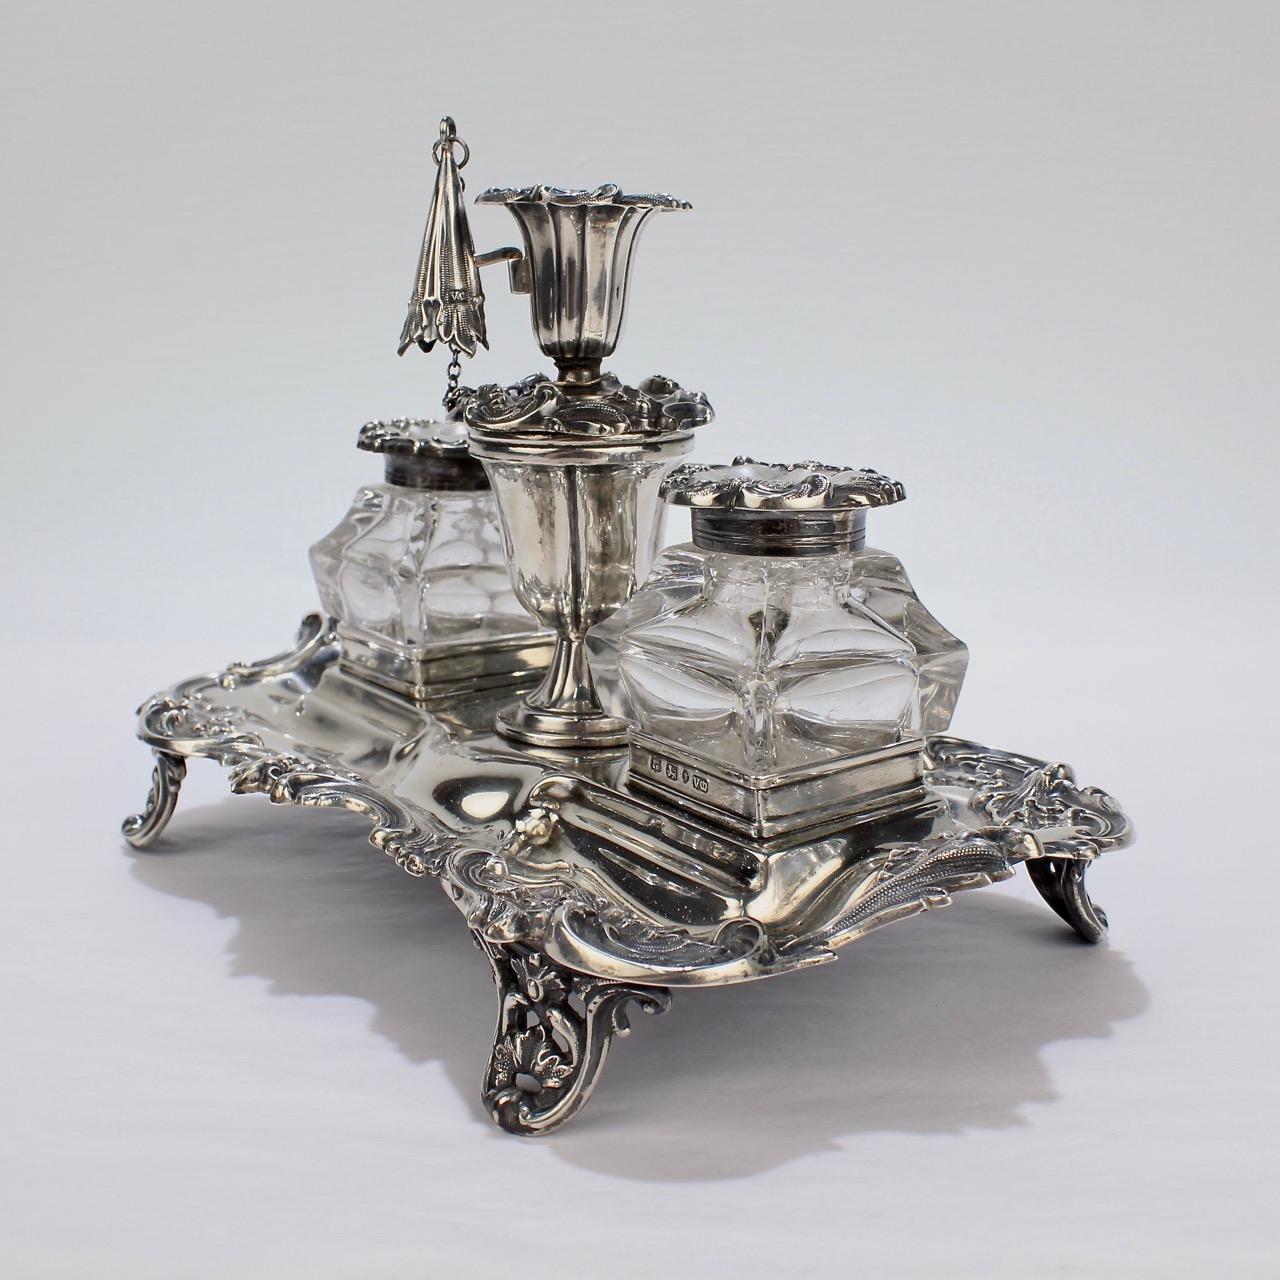 Exceptional Early Victorian English Sterling Silver Inkstand by Henry Wilkinson In Good Condition For Sale In Philadelphia, PA